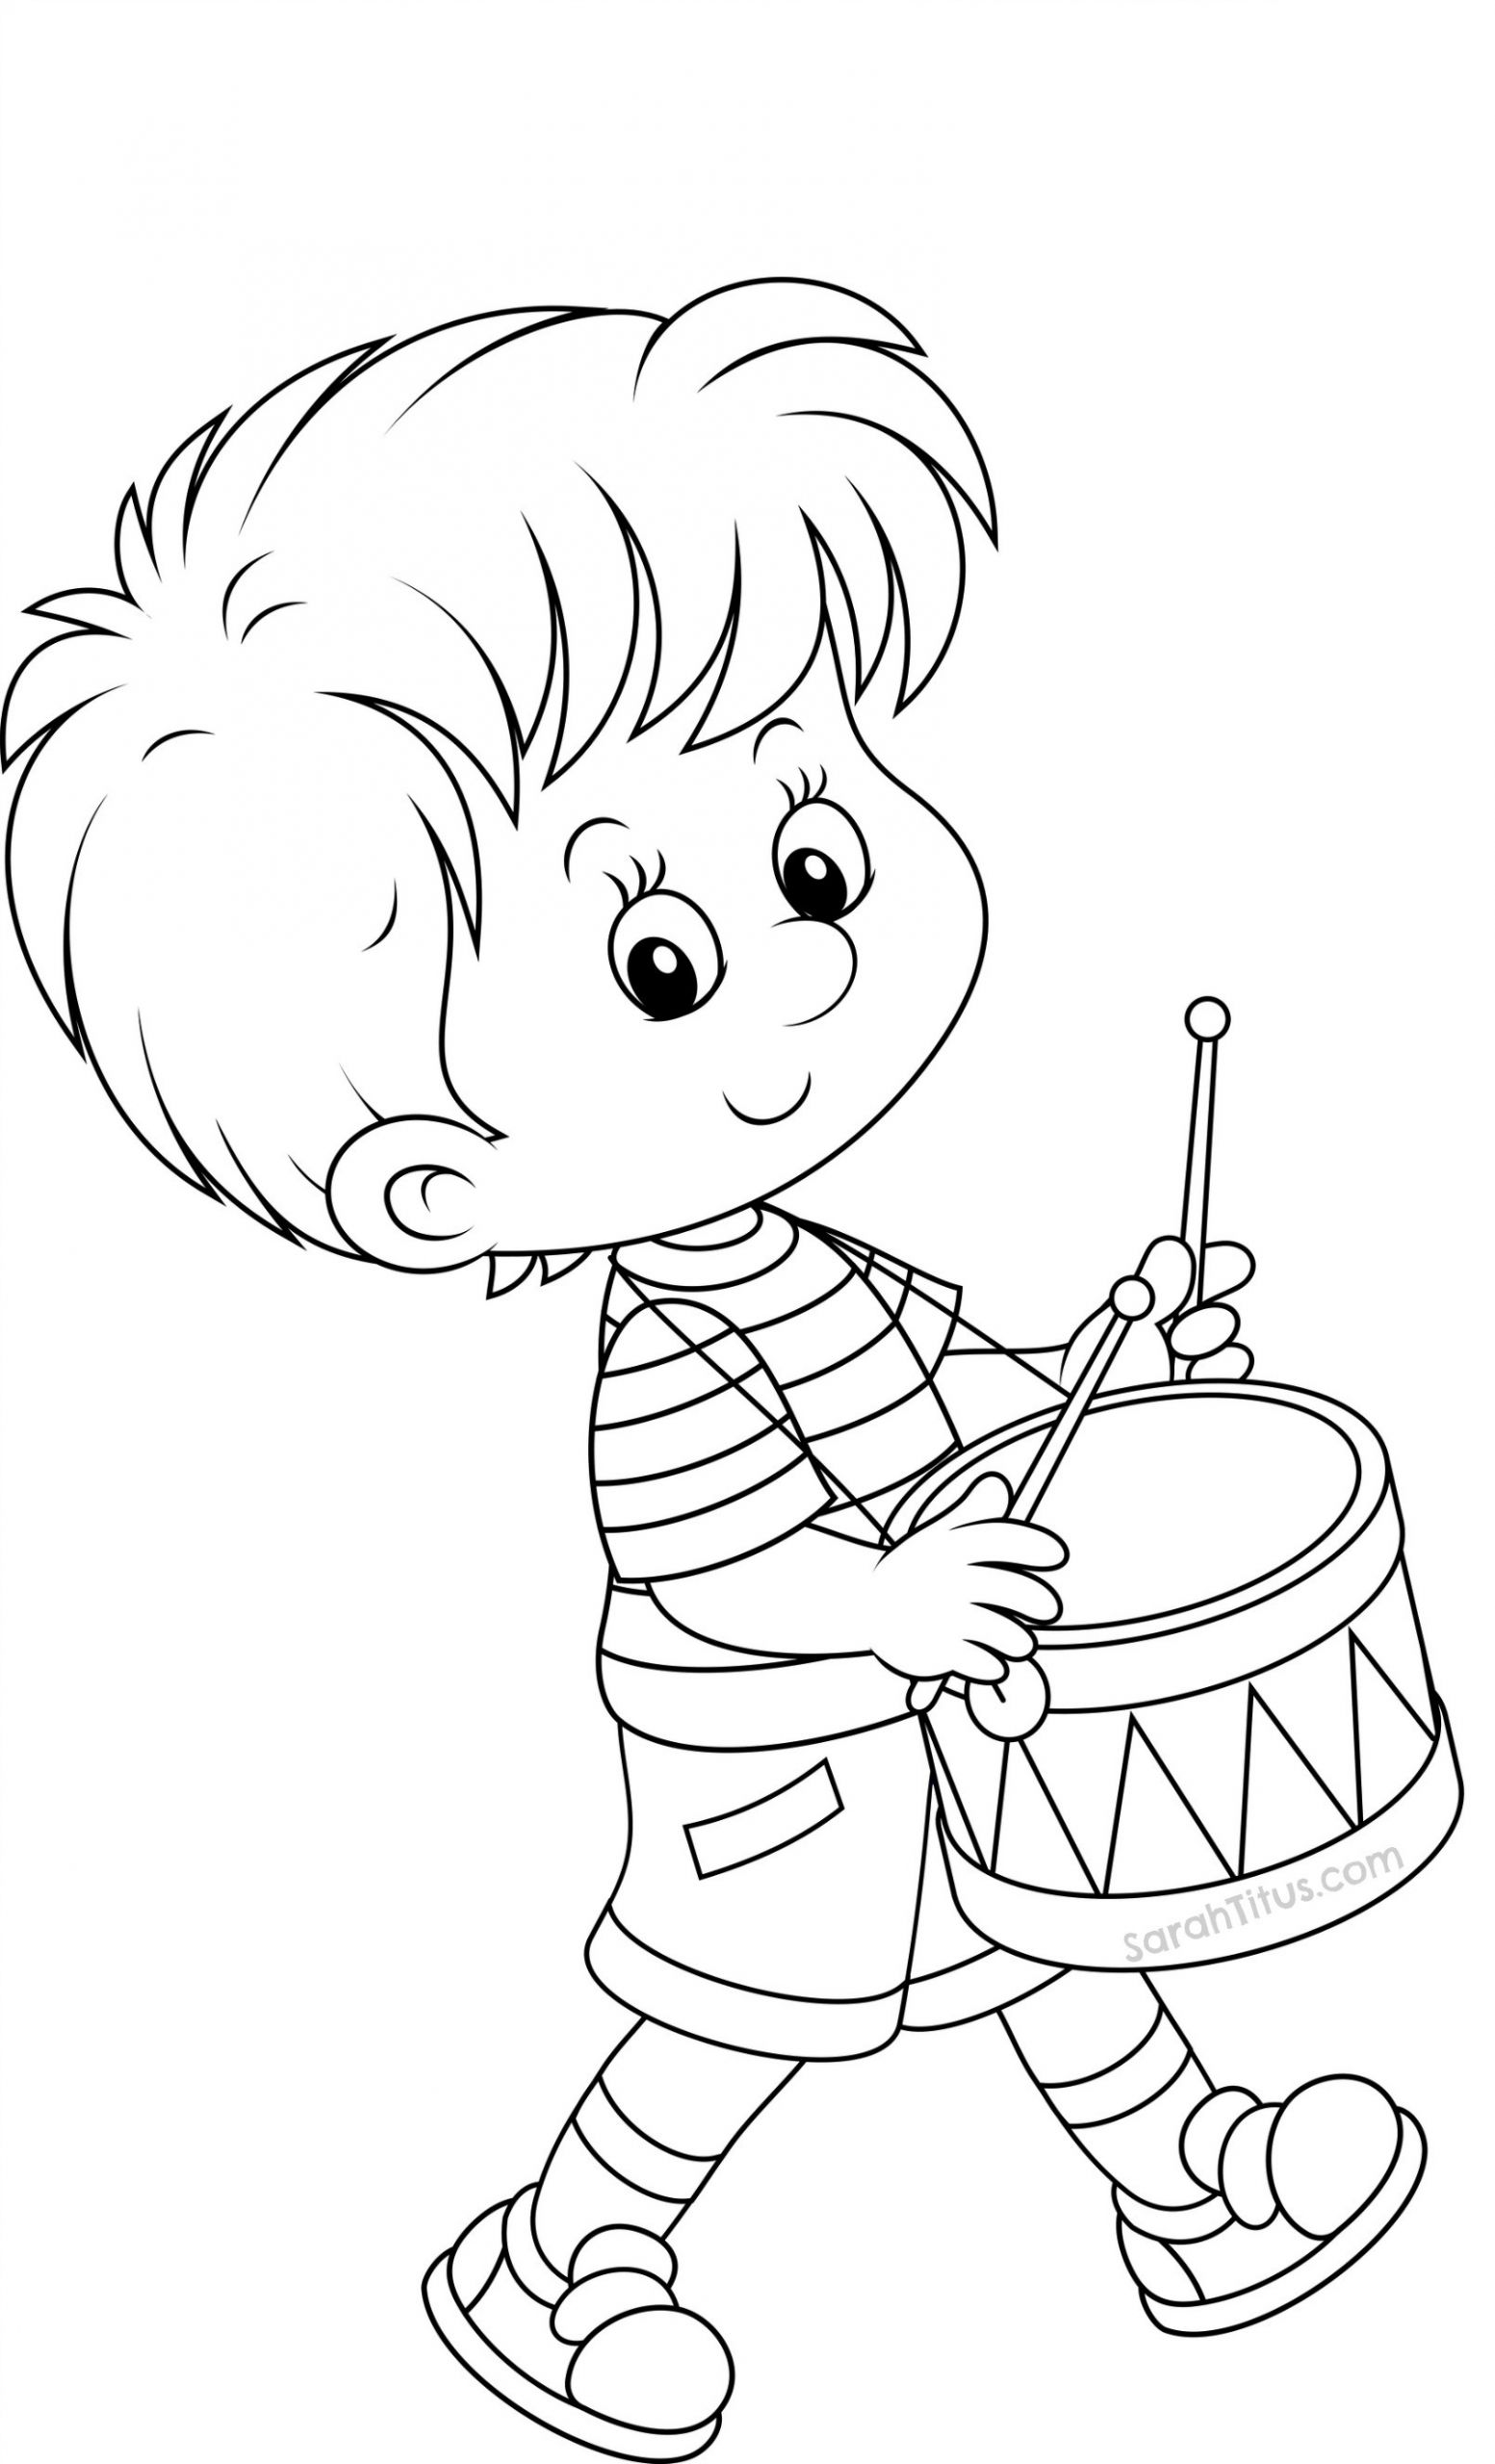 Child Coloring Page
 Back to School Coloring Pages Sarah Titus